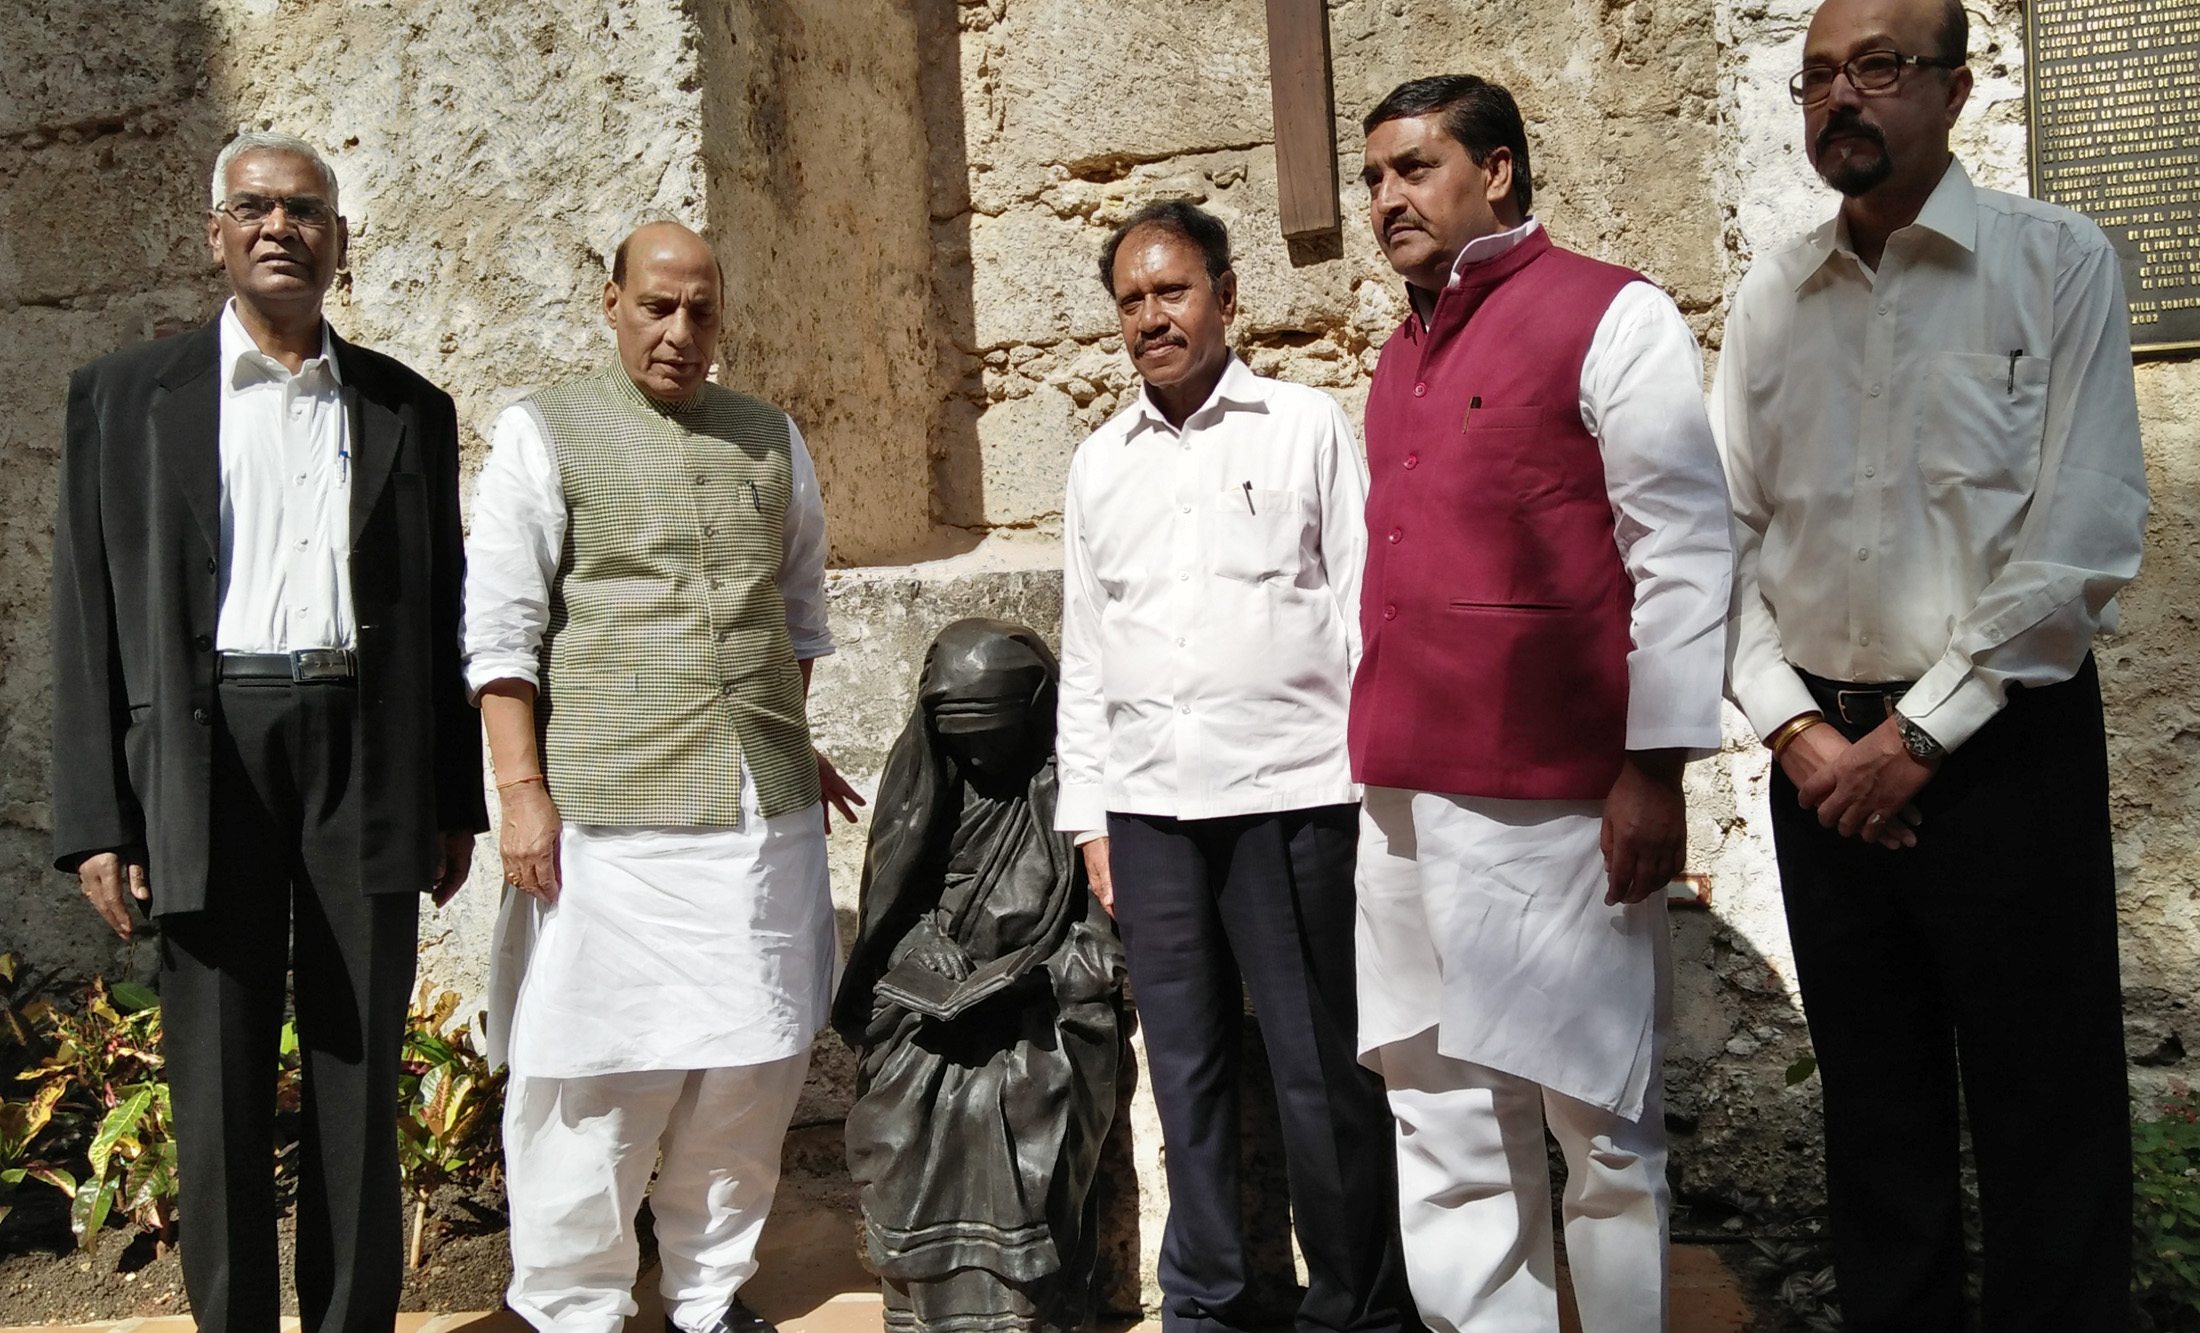 The Union Home Minister, Shri Rajnath Singh at the statue of Mother Teresa, in Old Havana on November 30, 2016.